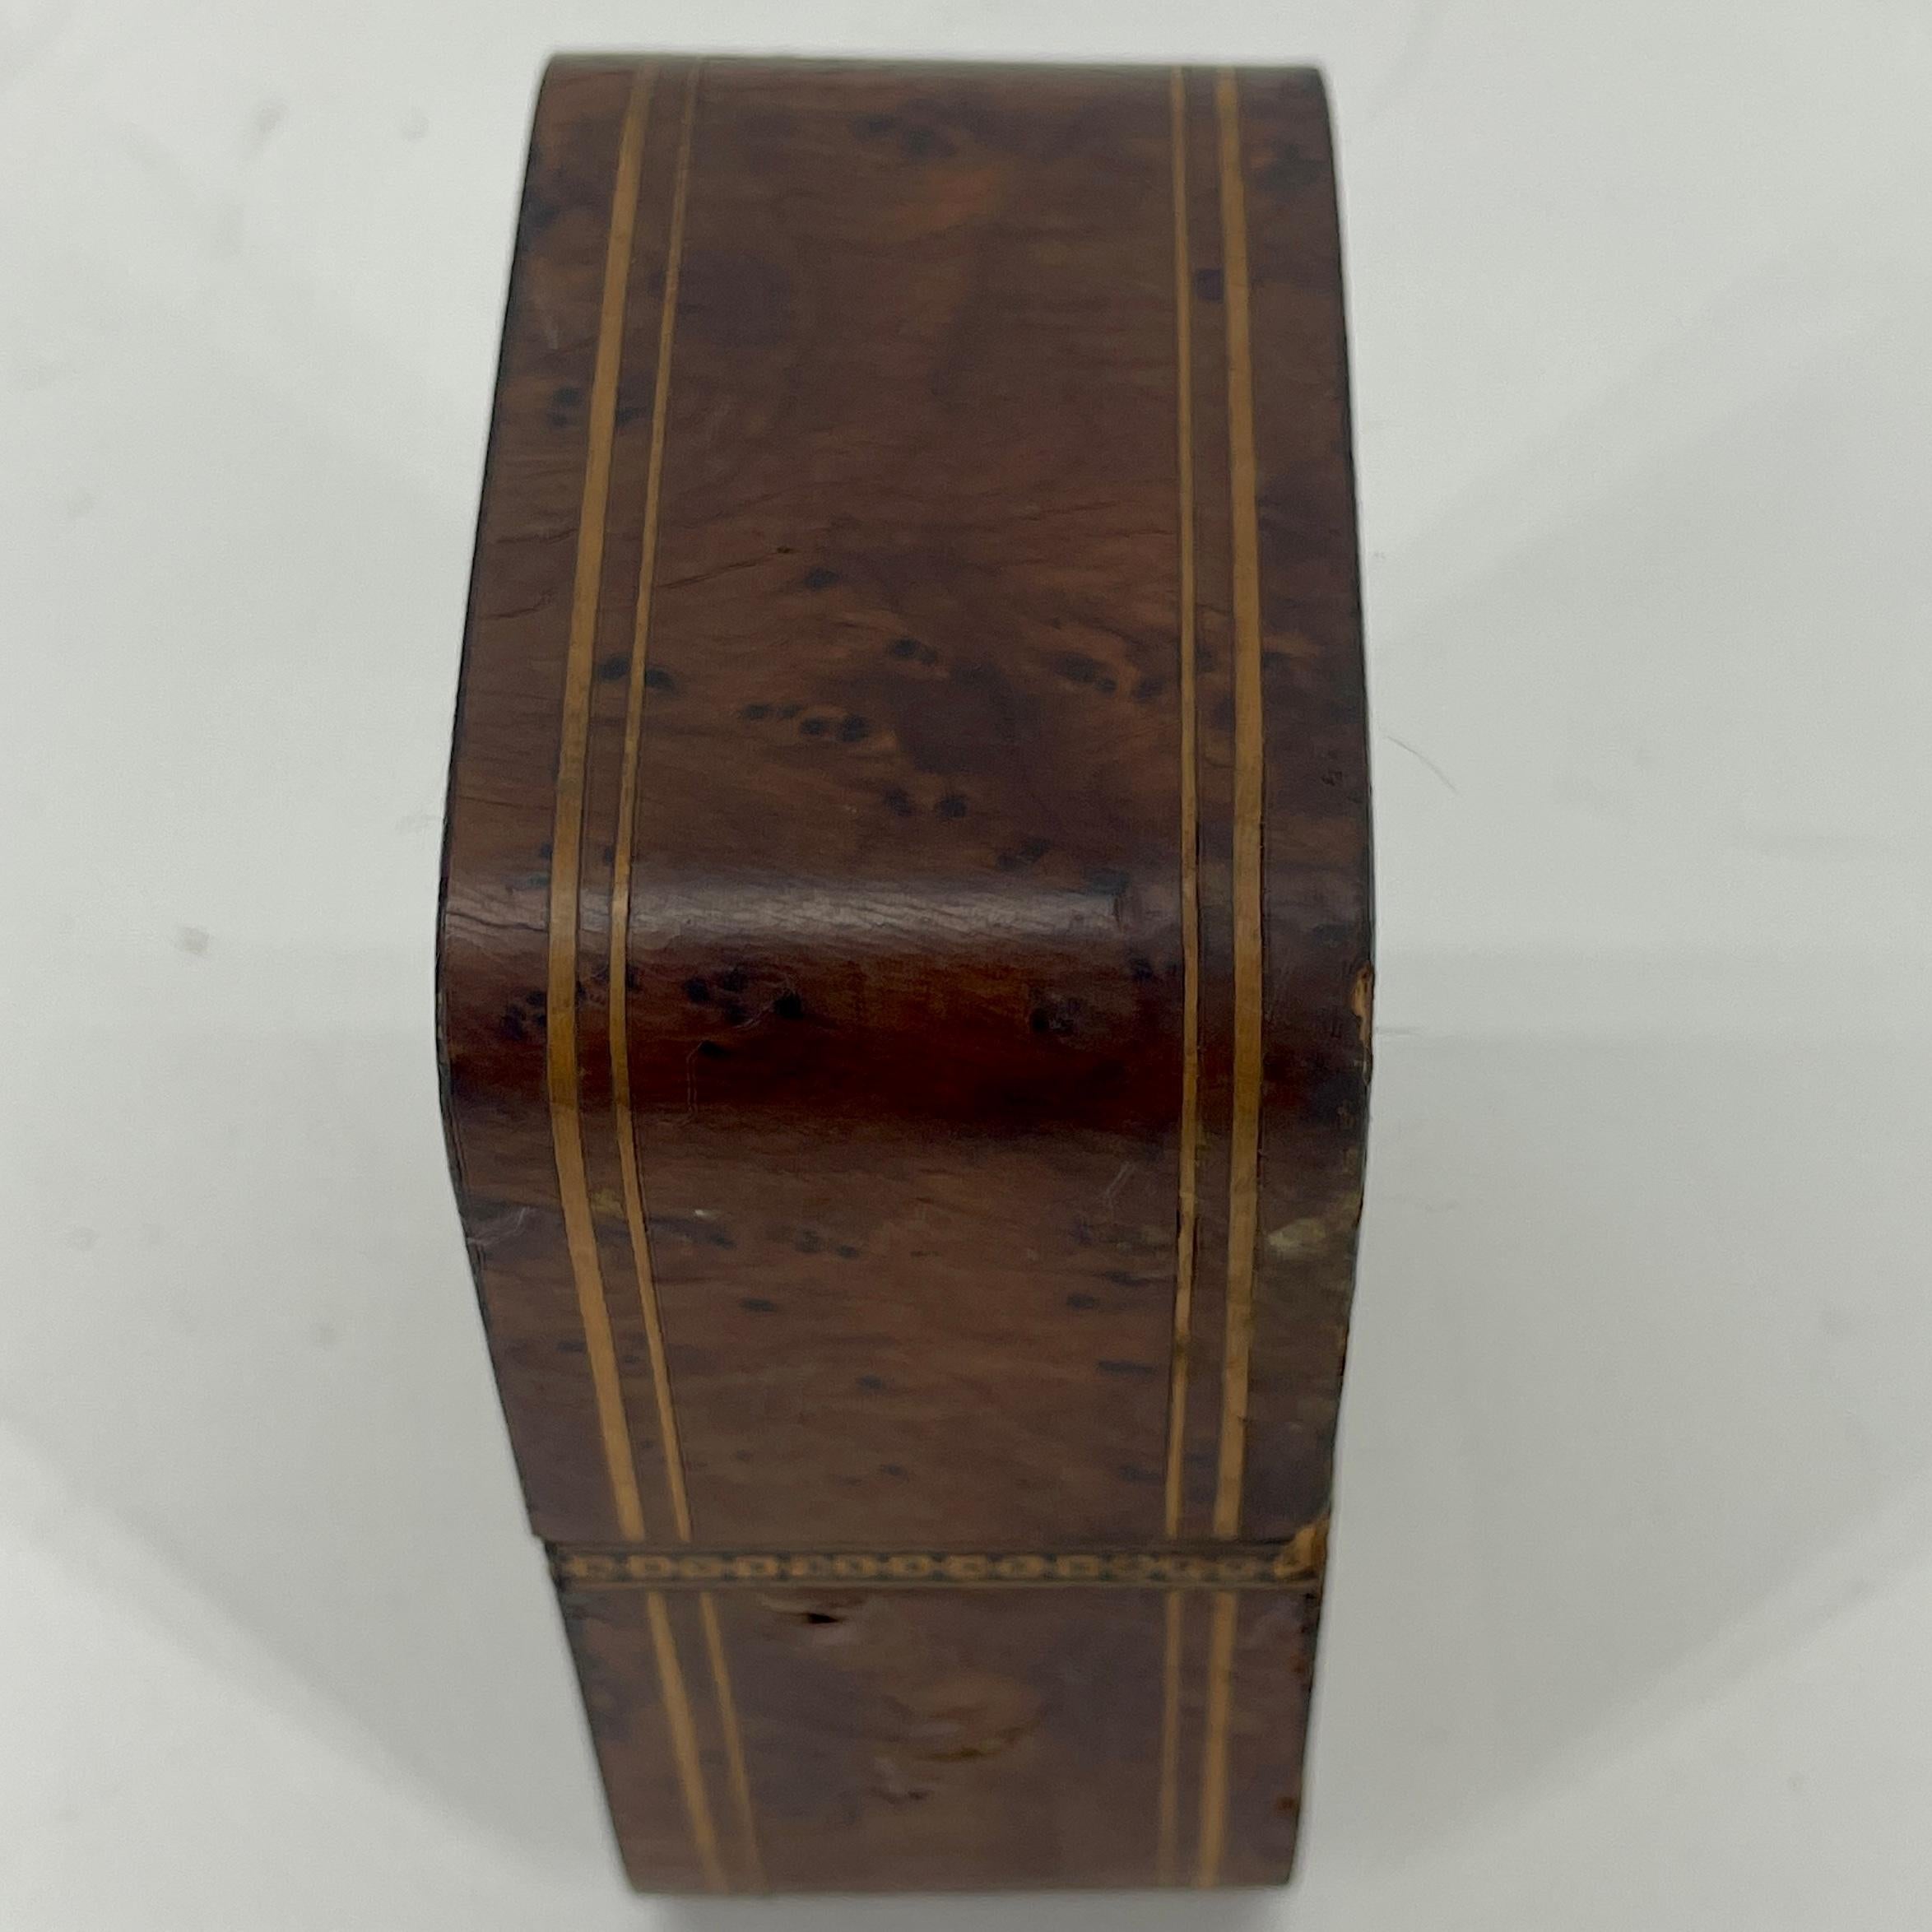 Hand-Crafted 19th Century European Inlaid Box For 2 Sets of Playing Cards 